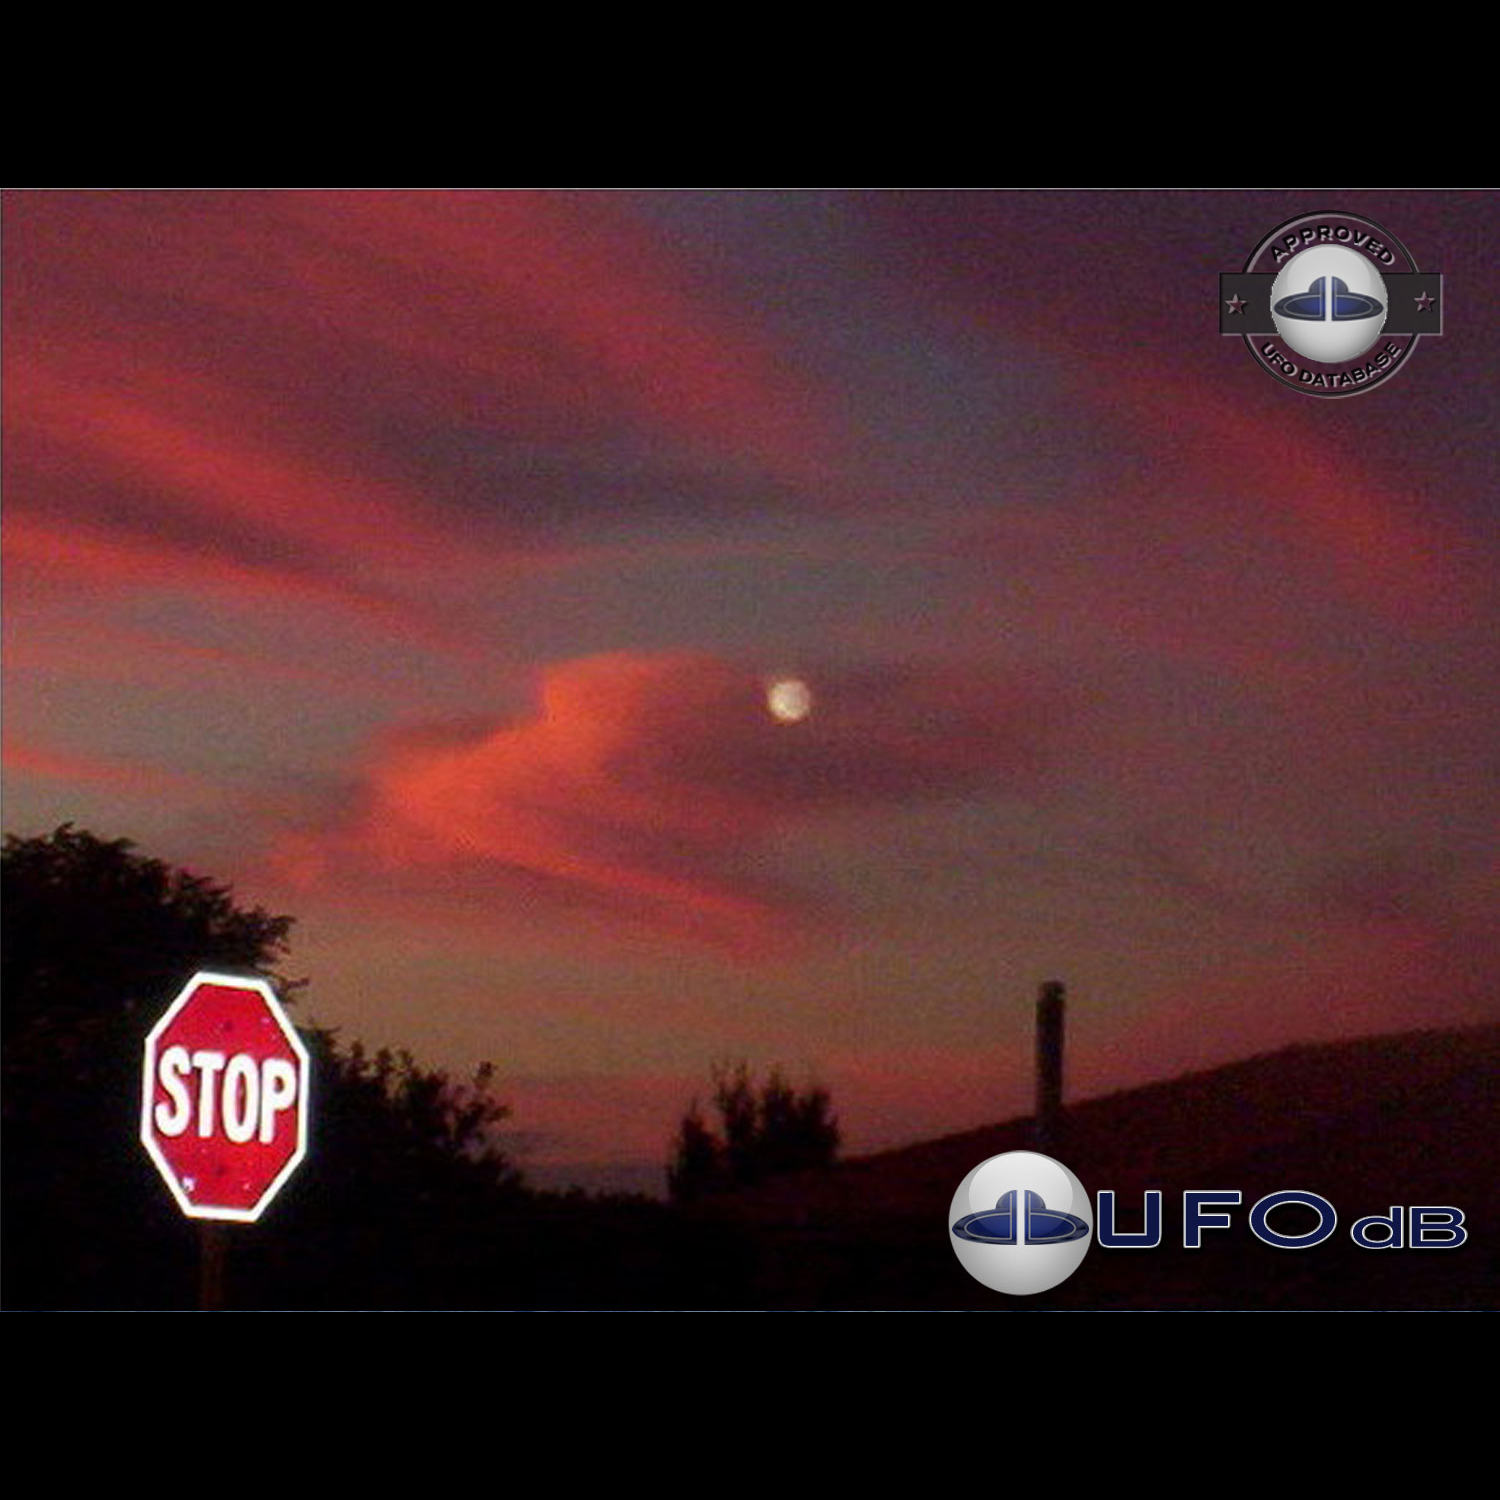 UFO picture shot on dusk at Waroona in the Peel region of Australia UFO Picture #145-1